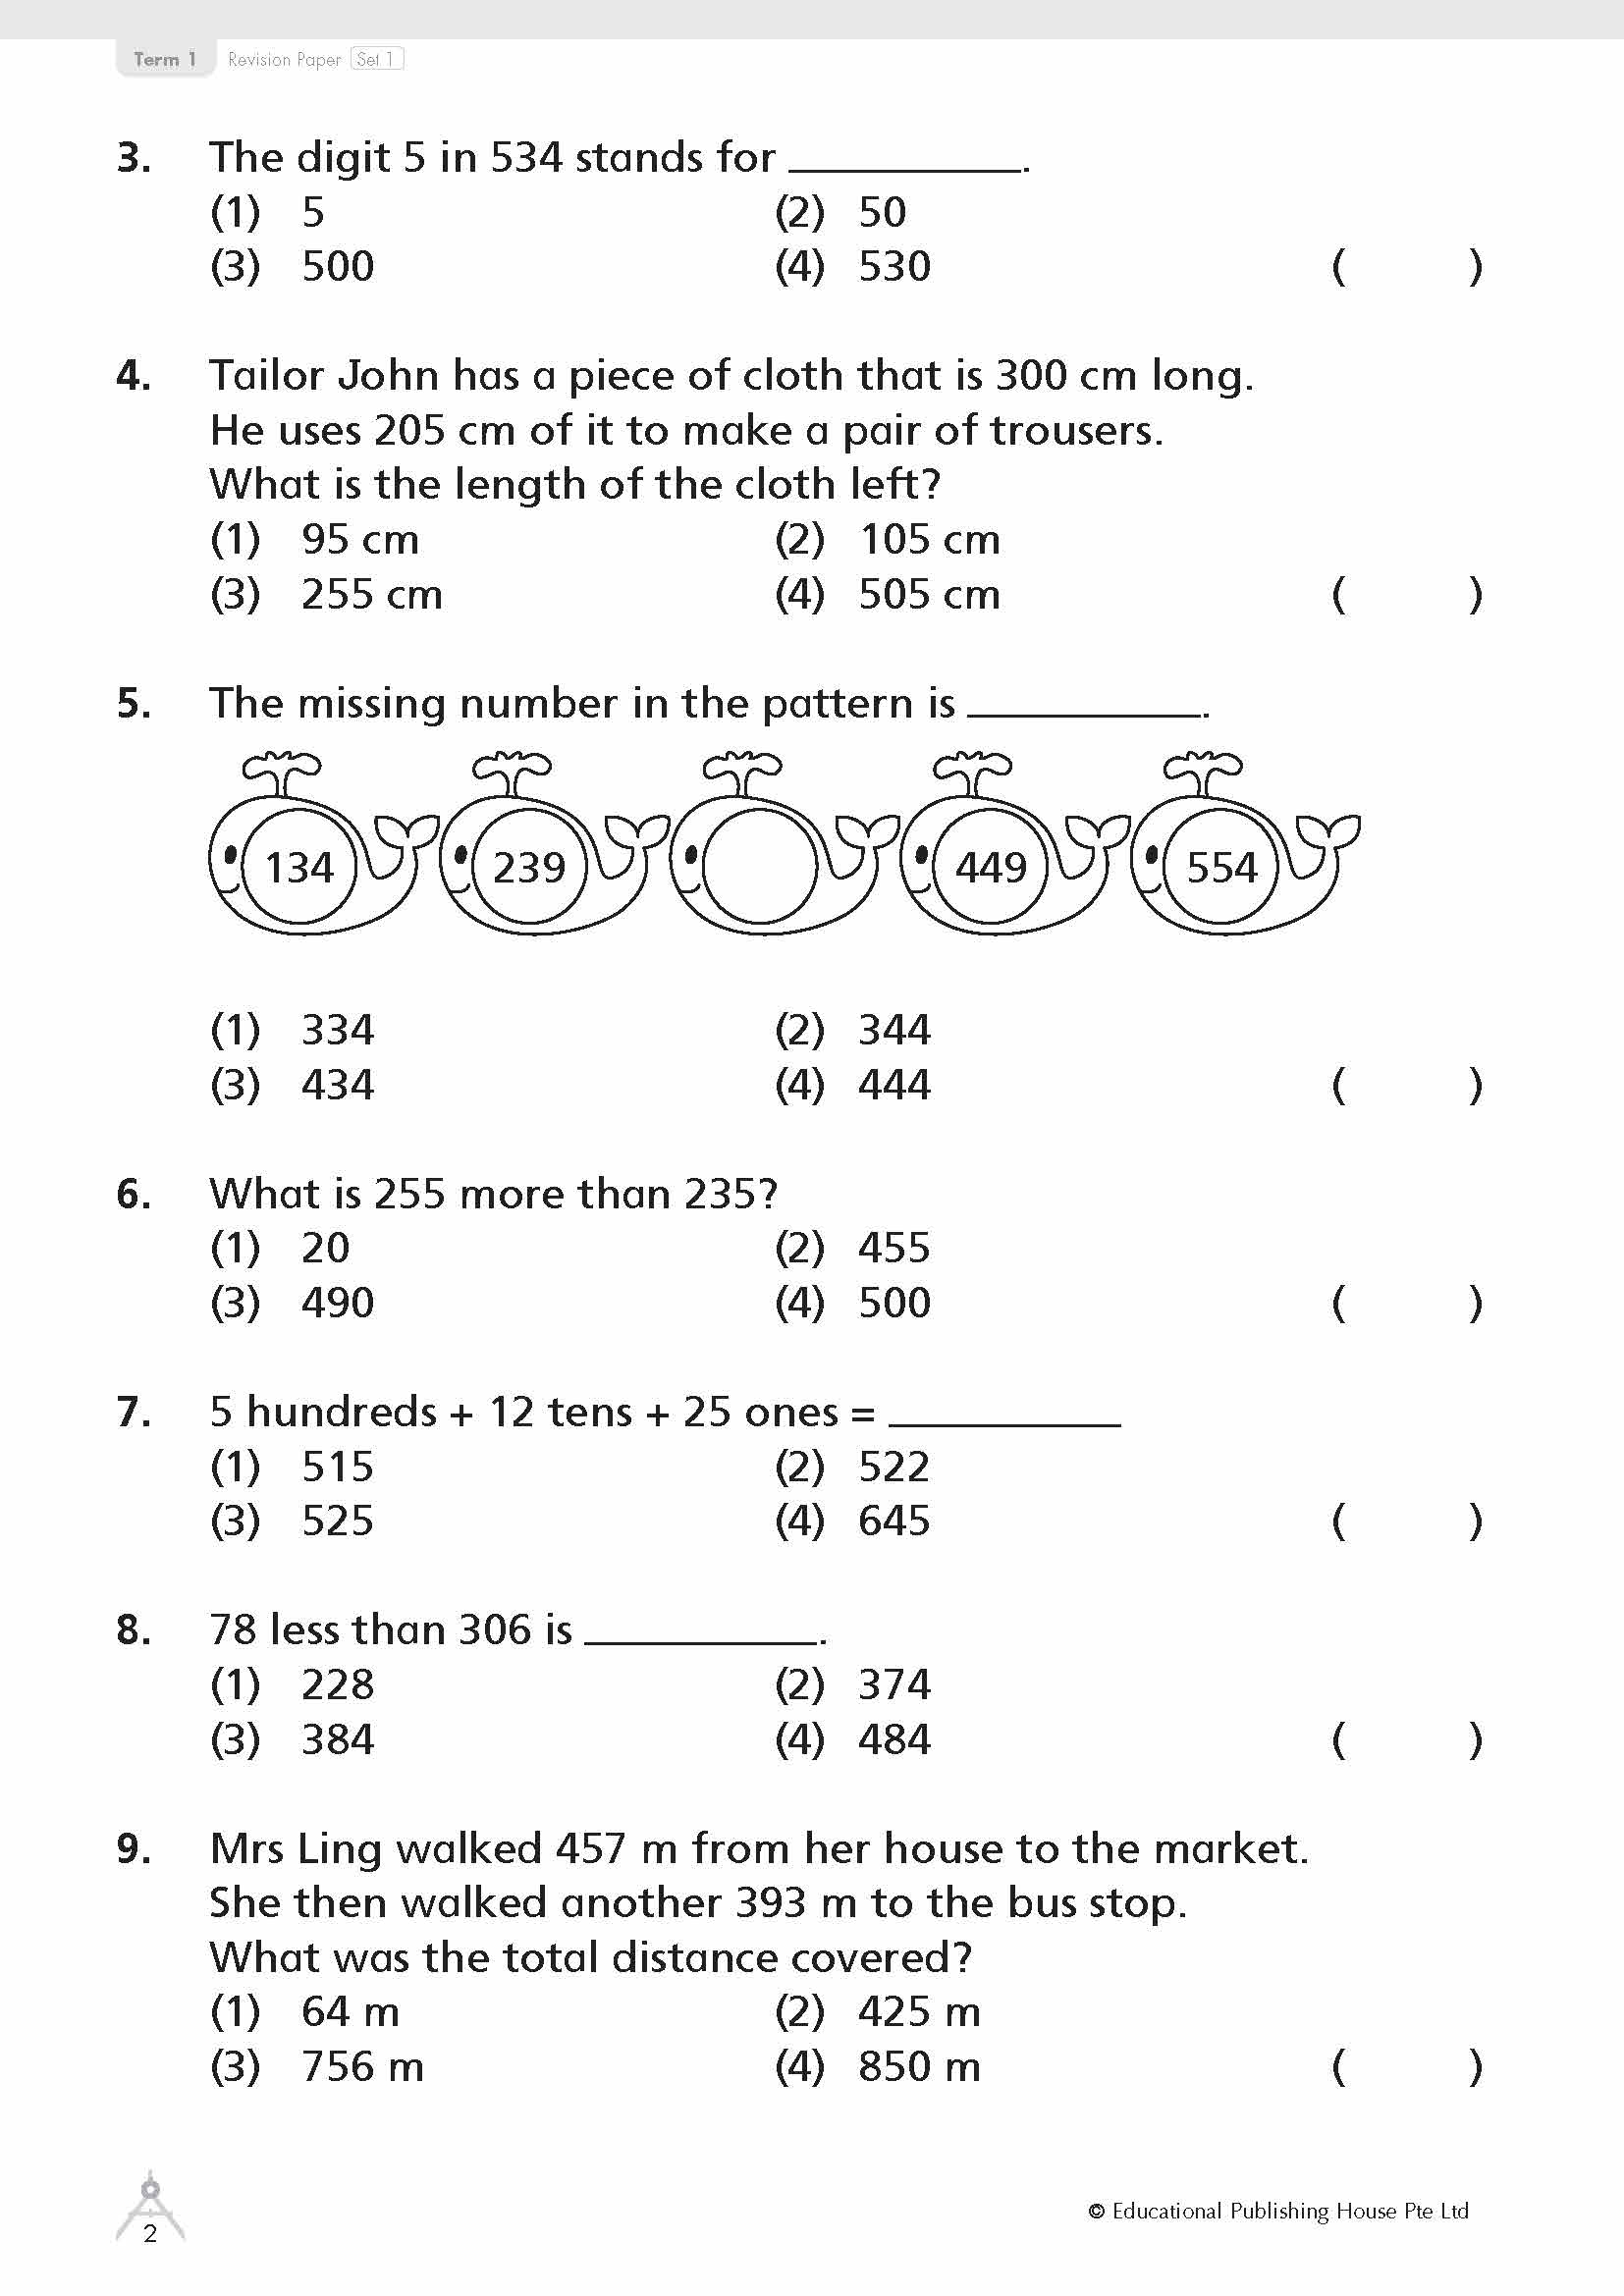 Primary 2 Mathematics Revision Papers